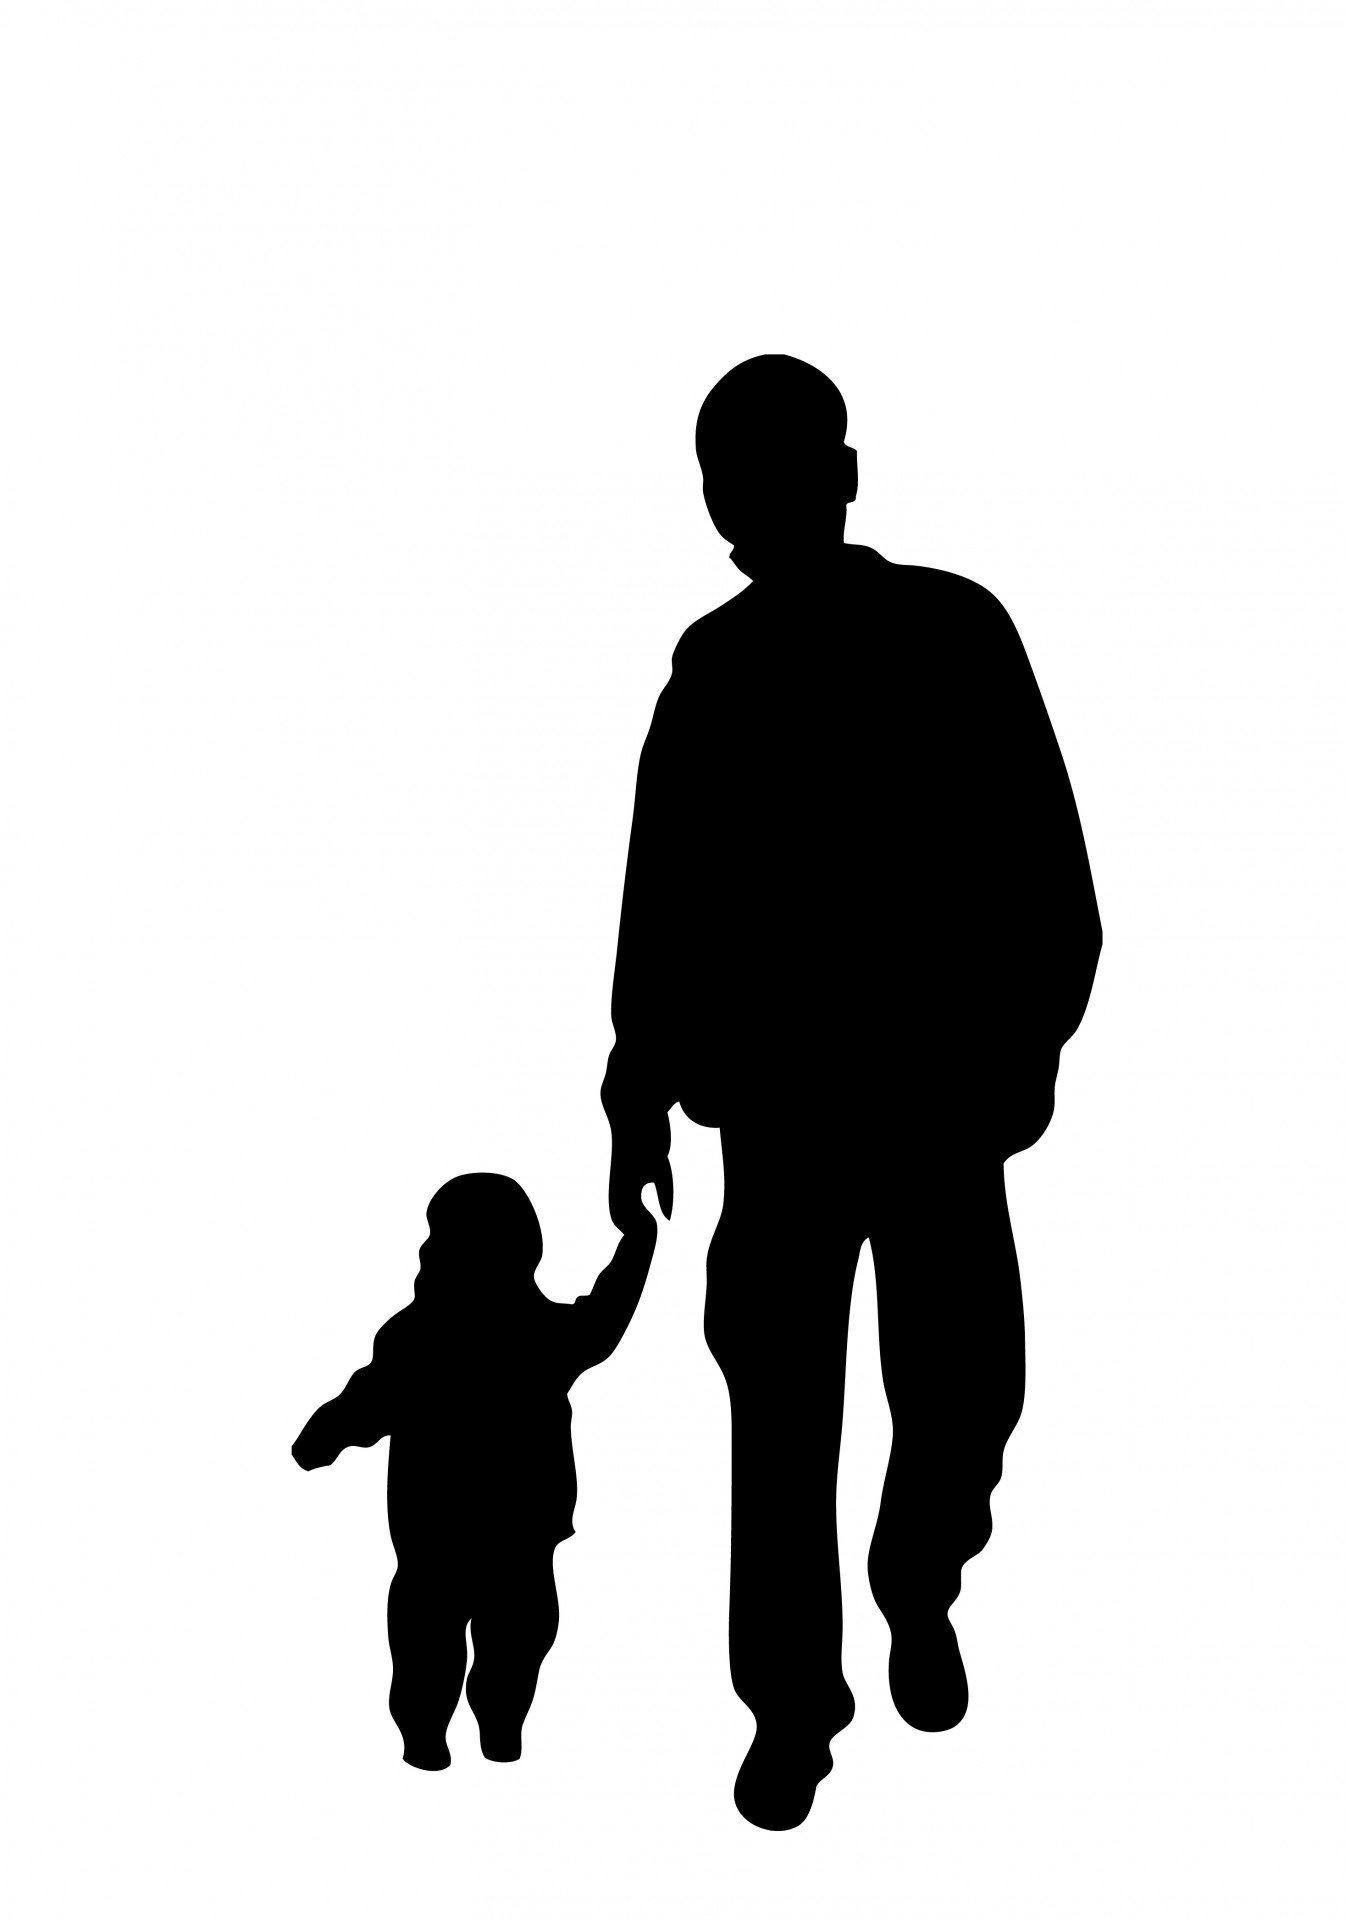 Dad baby silhouette clipart. 